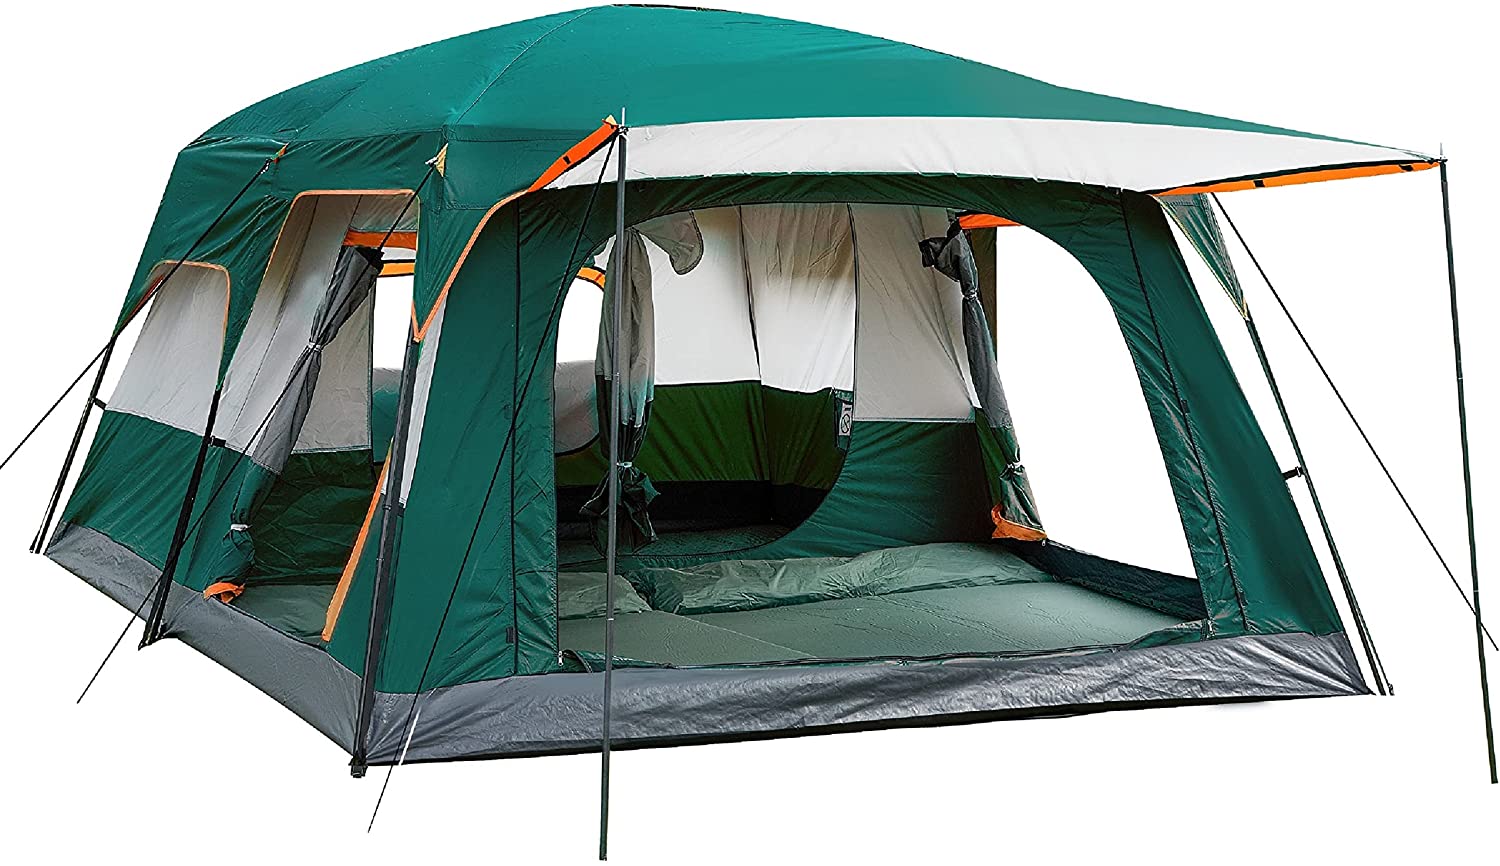 Large Camping Tents- Tips for Buying the Camping Tents